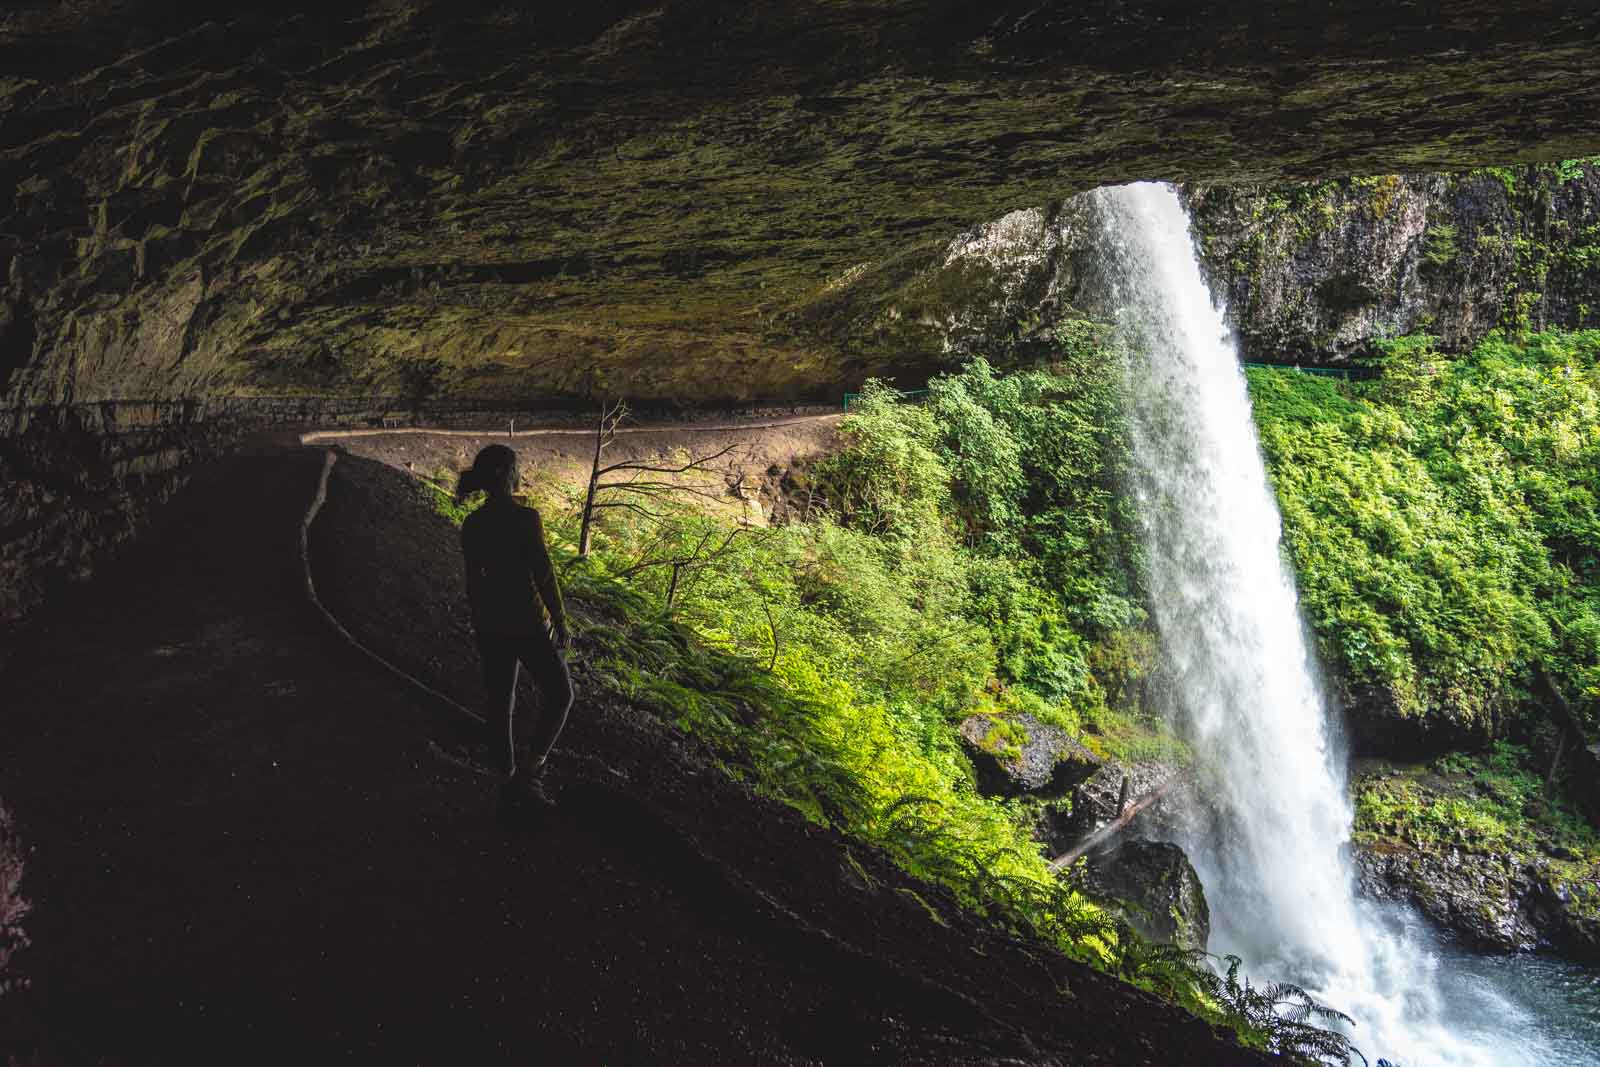 North Falls is a must on your Silver Falls hike.